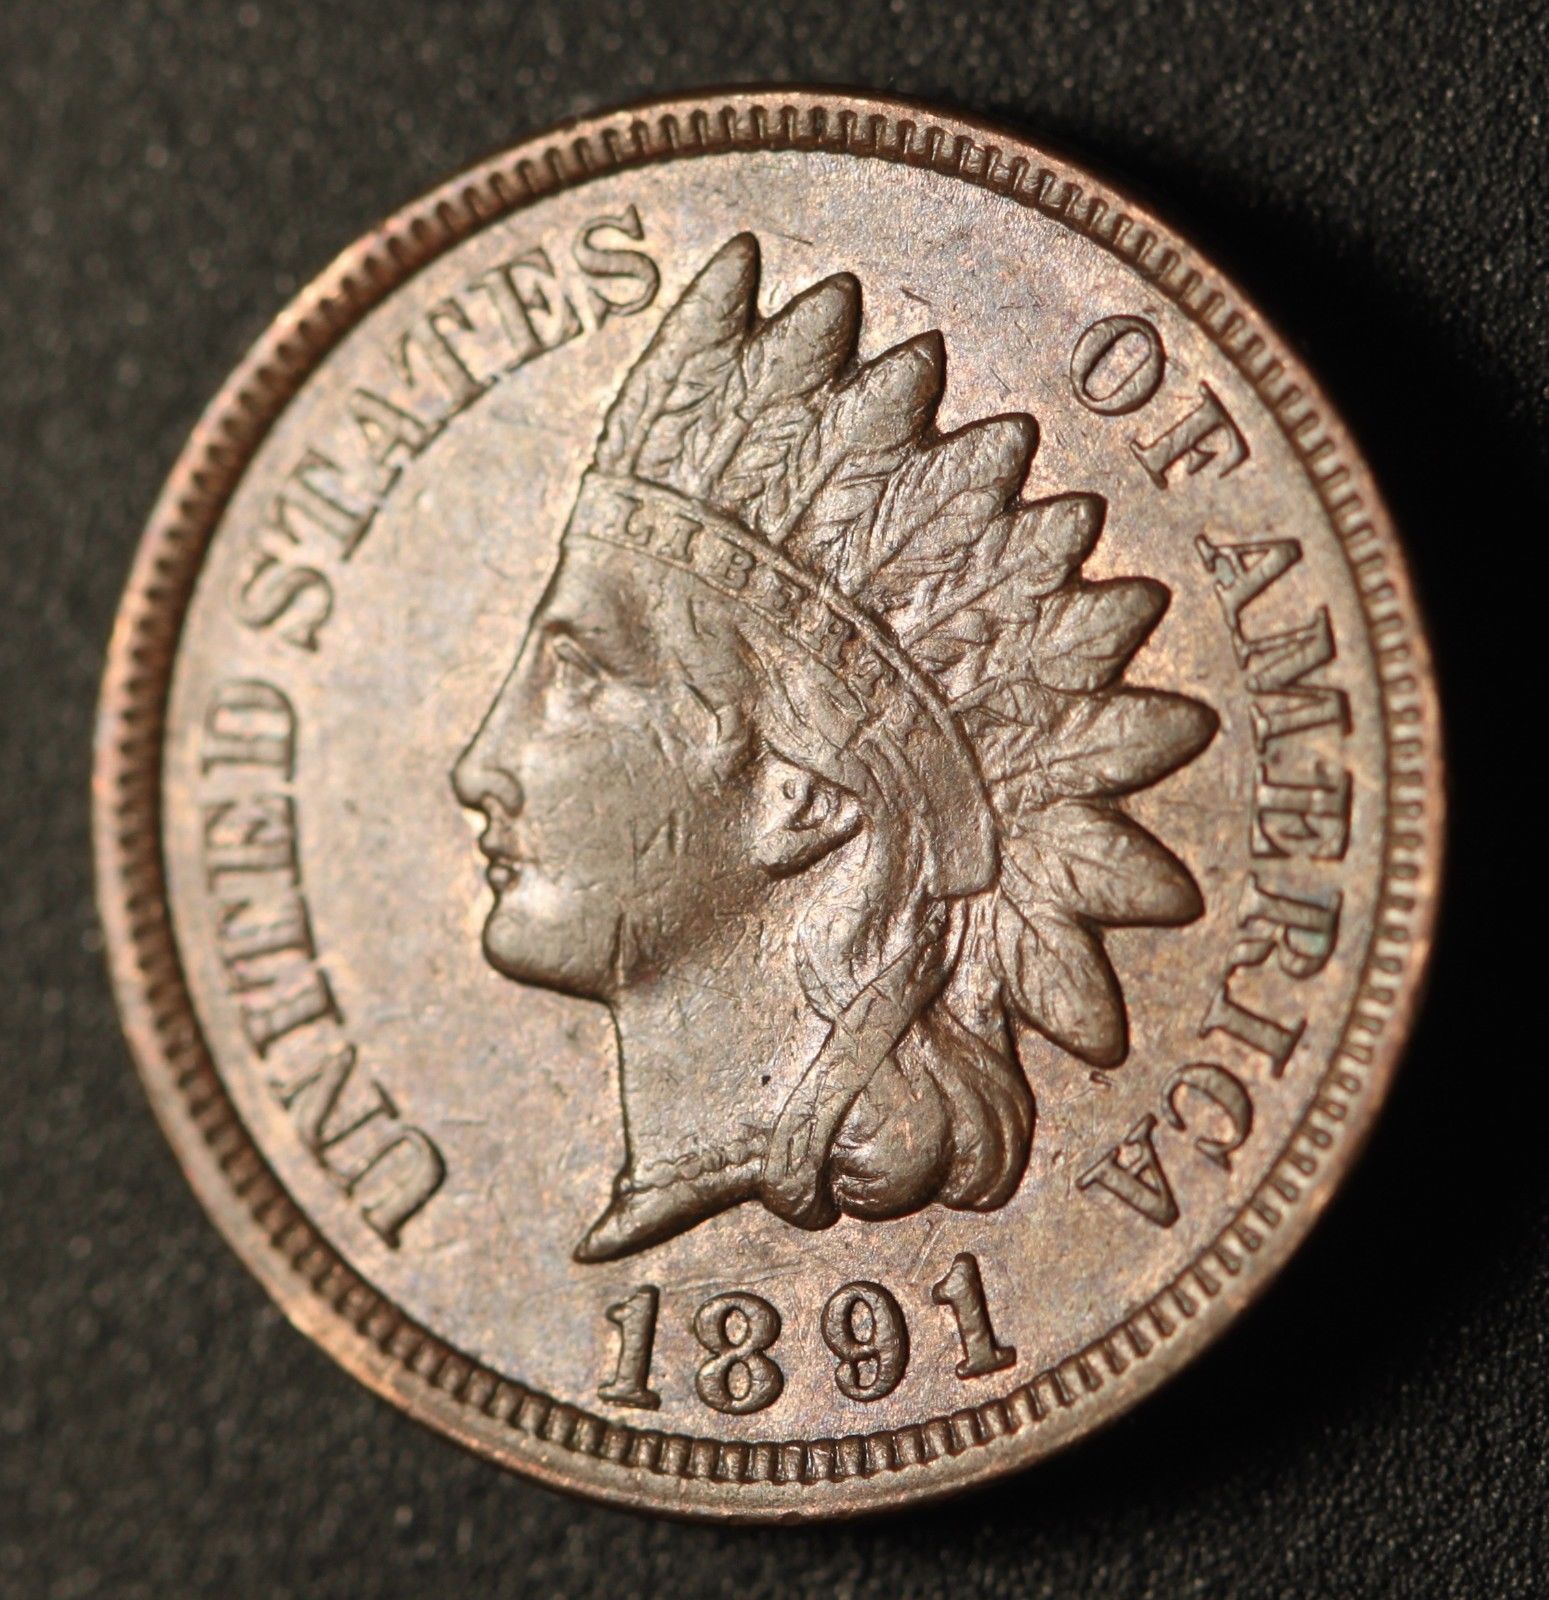 1891 RPD-003 - Indian Head Penny - Photo by Ed Nathanson